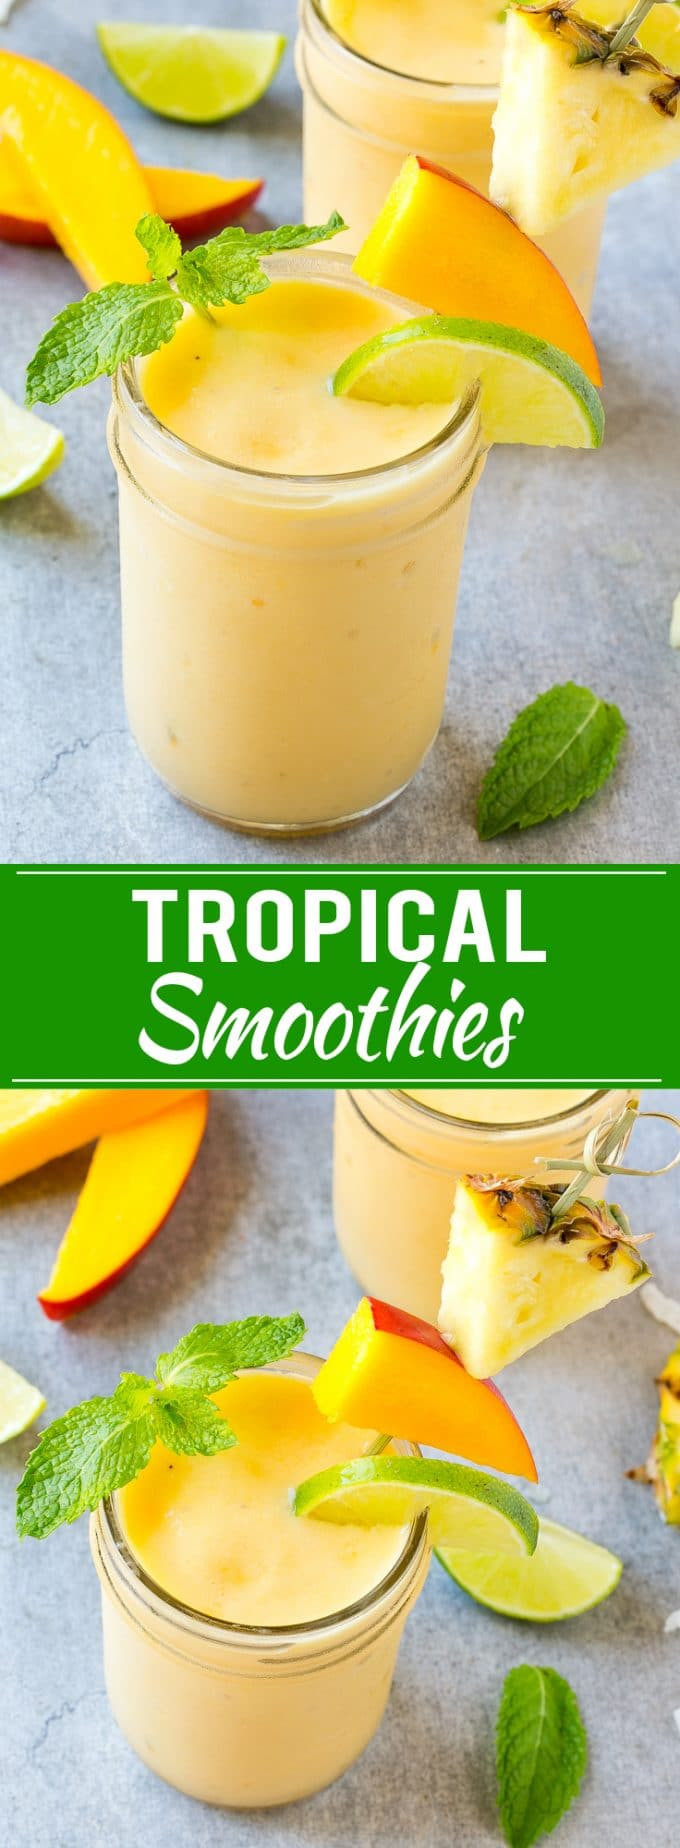 Tropical Smoothie Smoothies
 Tropical Smoothie Recipe Dinner at the Zoo